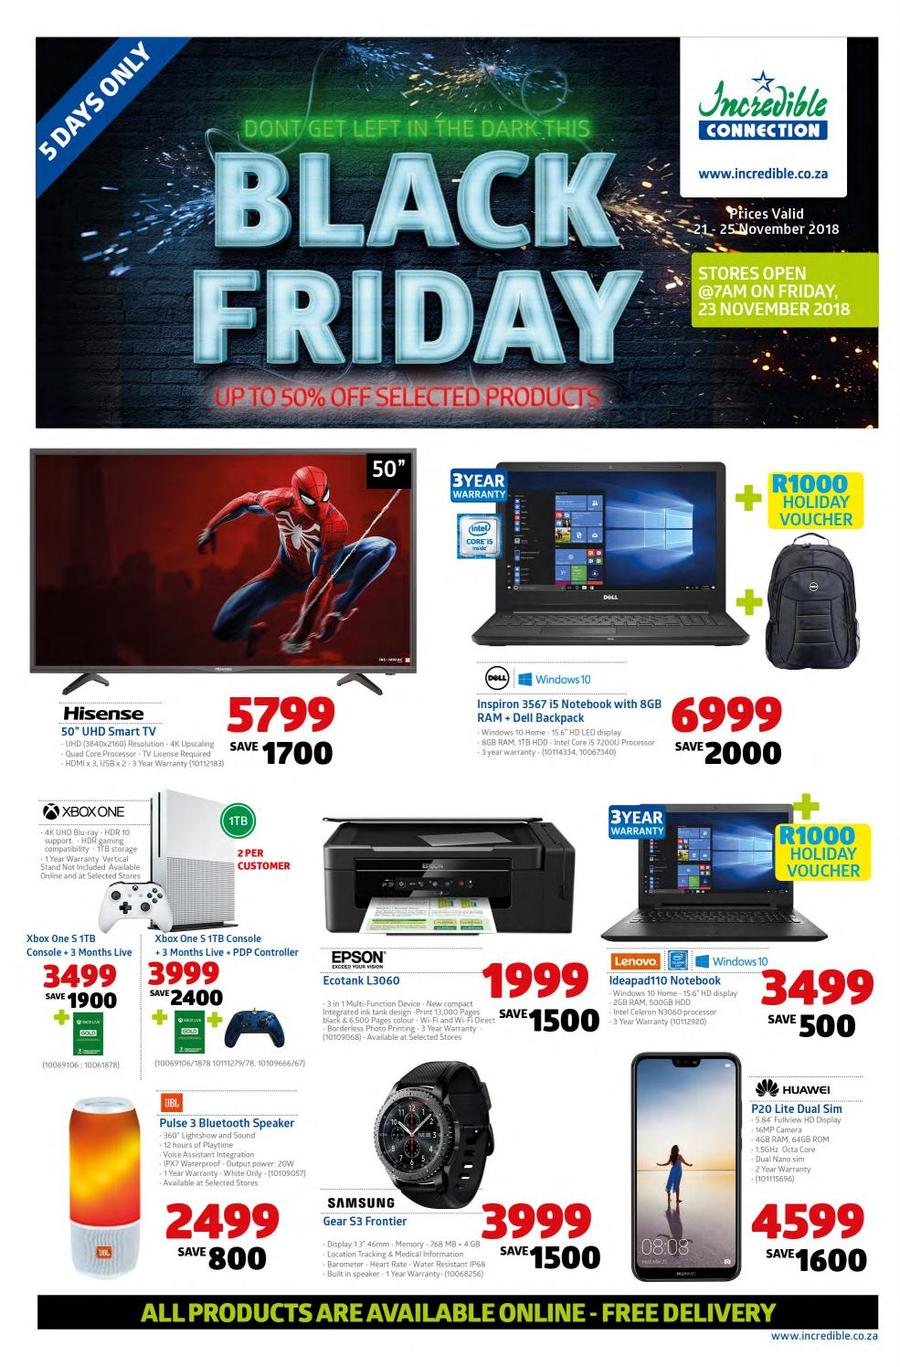 Incredible Connection Black Friday Deals 2019